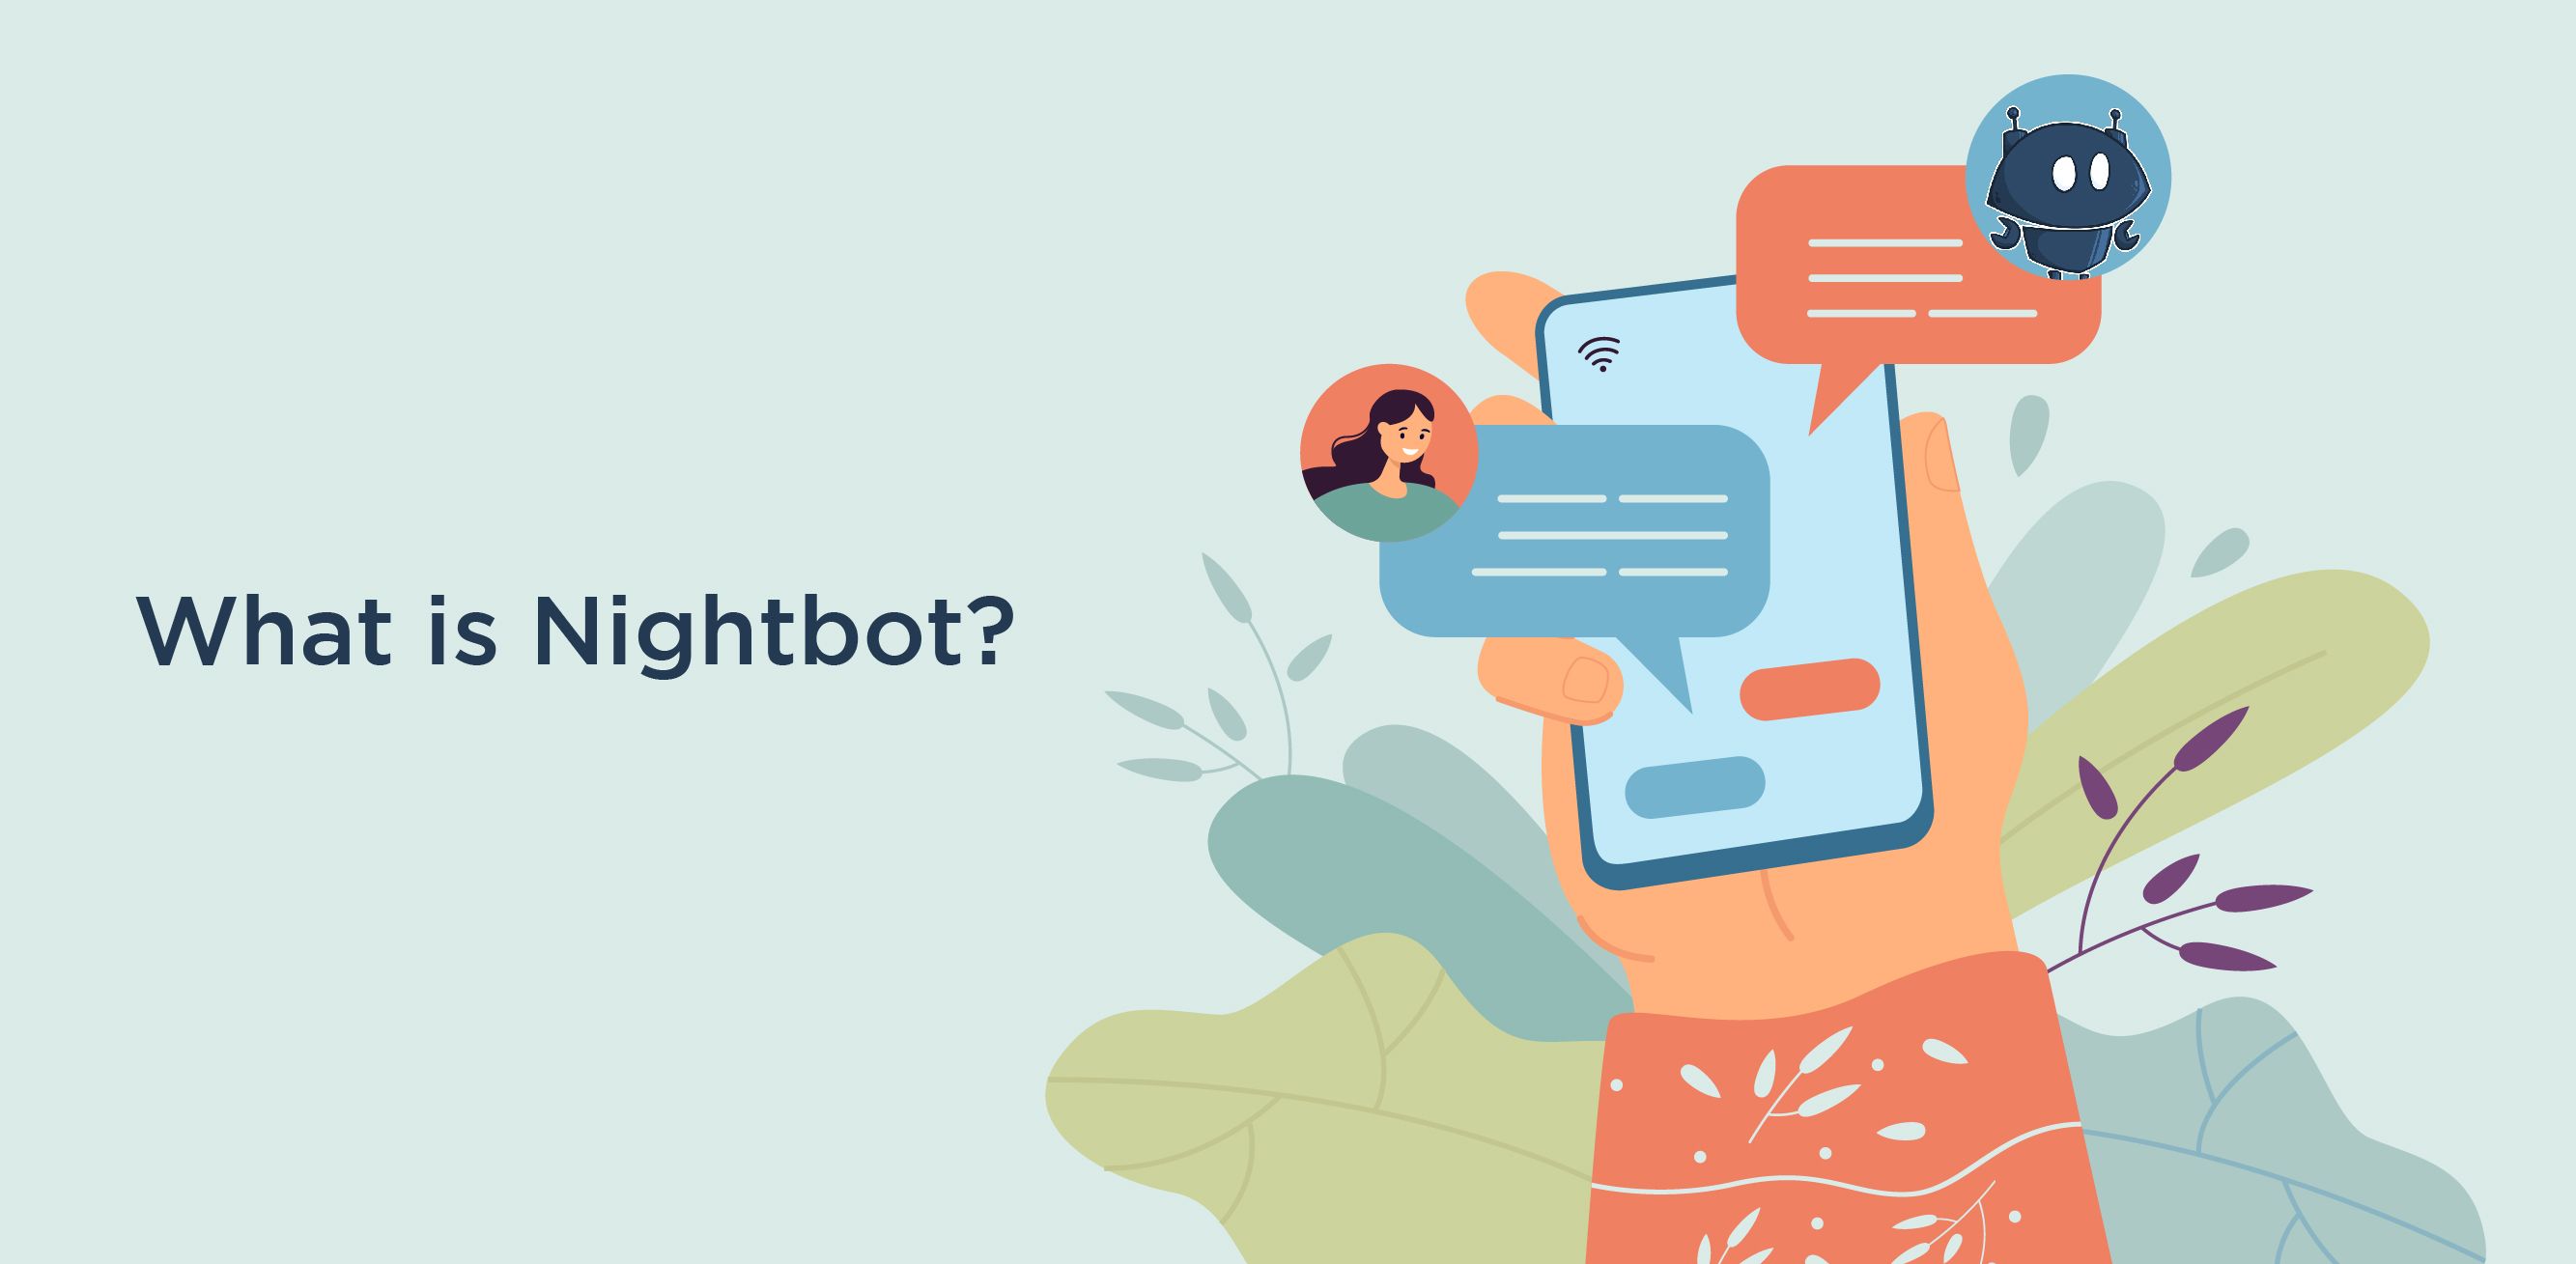 What is Nightbot?